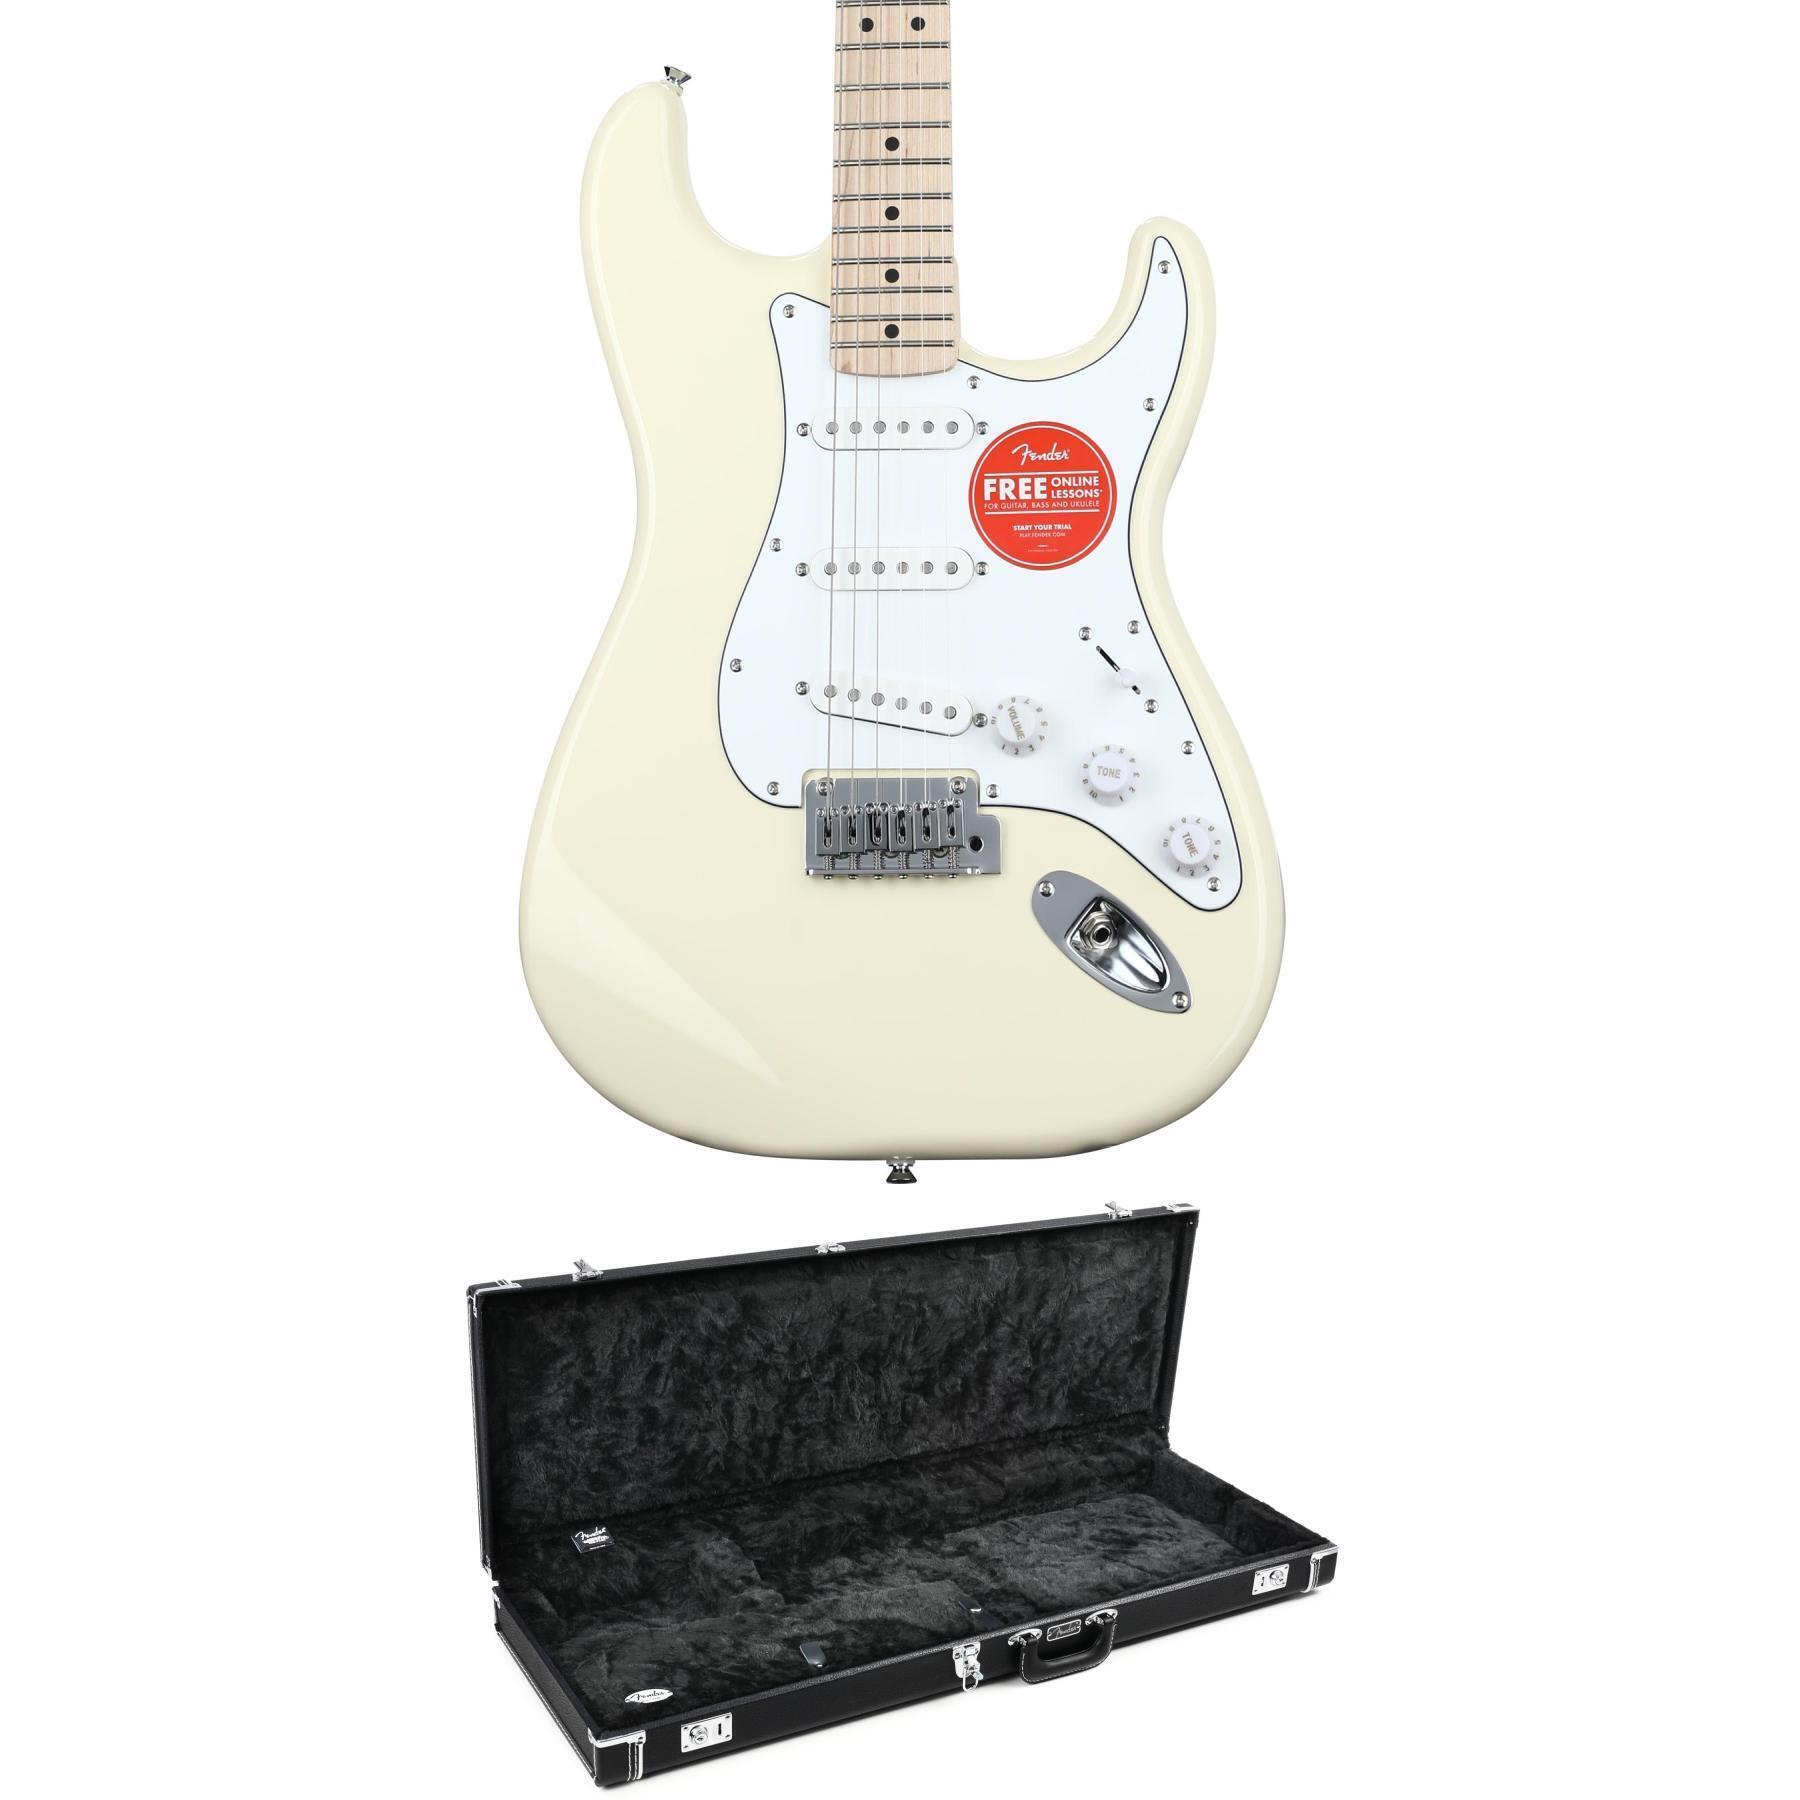 Squier Affinity Series Stratocaster Electric Guitar with Hard Case -  Olympic White with Maple Fingerboard